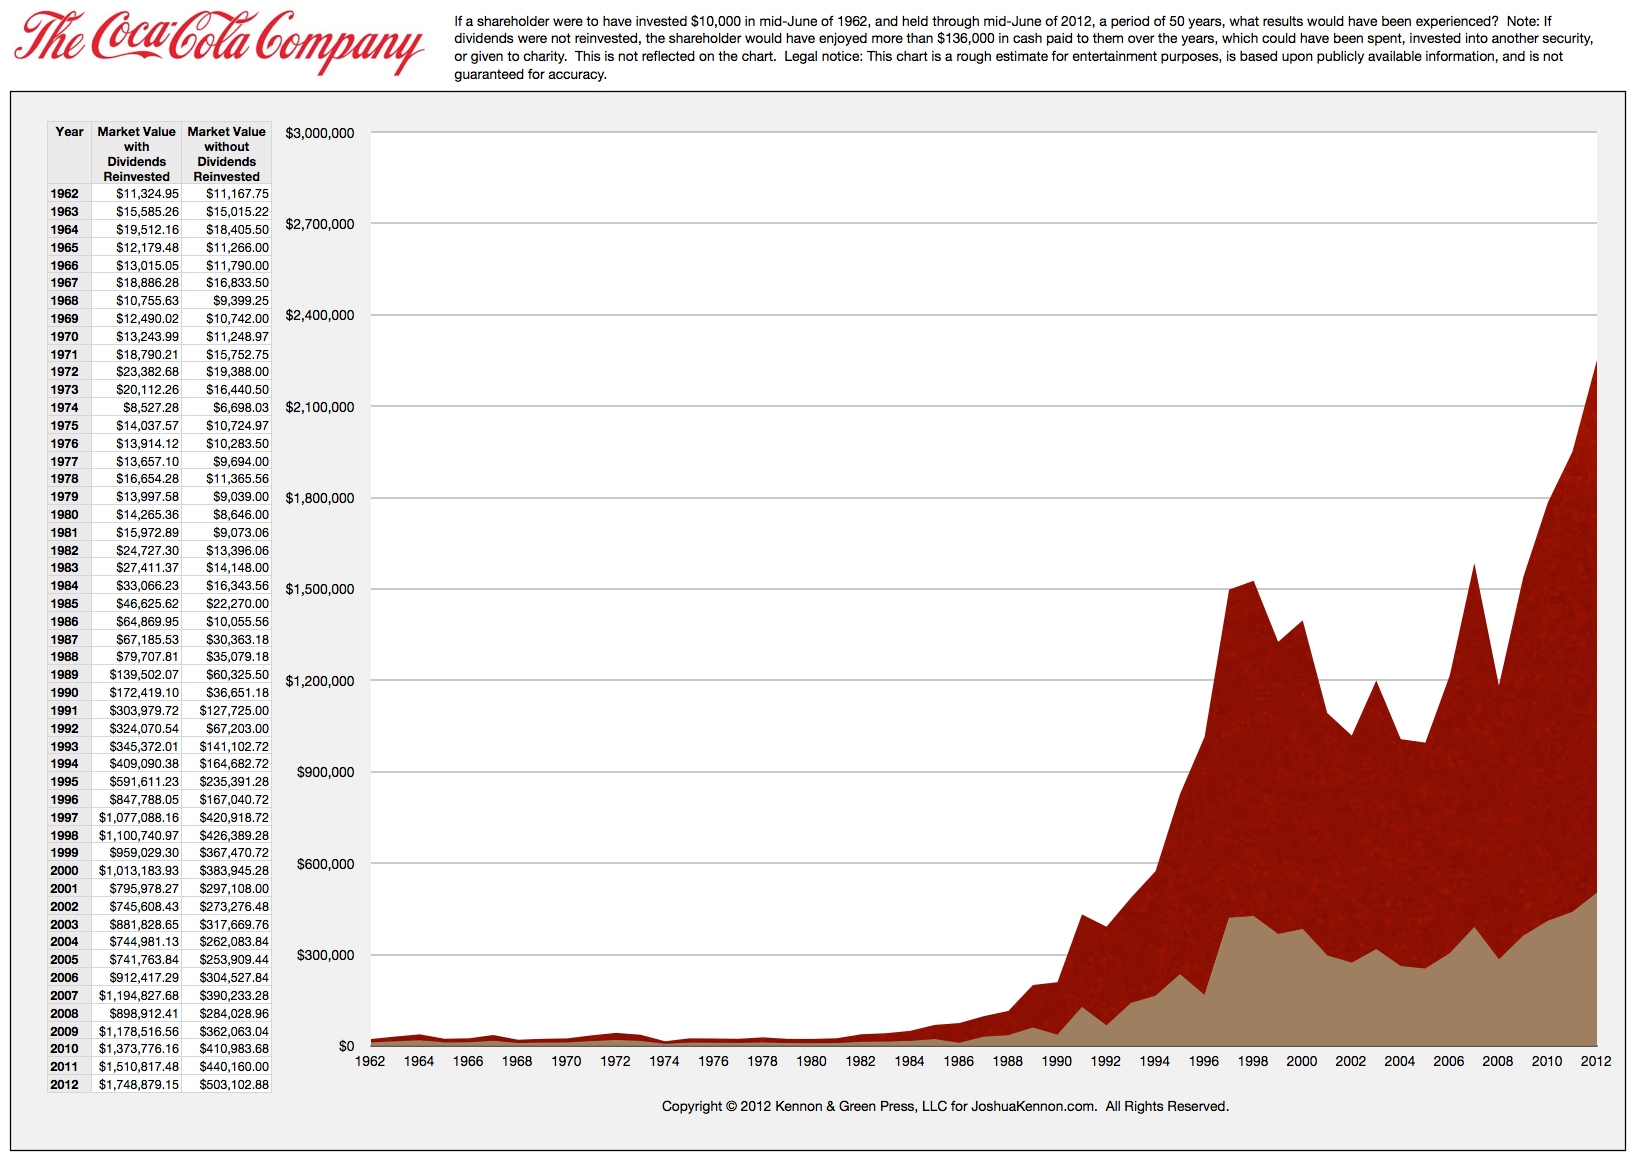 Coca-Cola-Stock-with-Dividends-Reinvested-Over-Past-50-Years.png